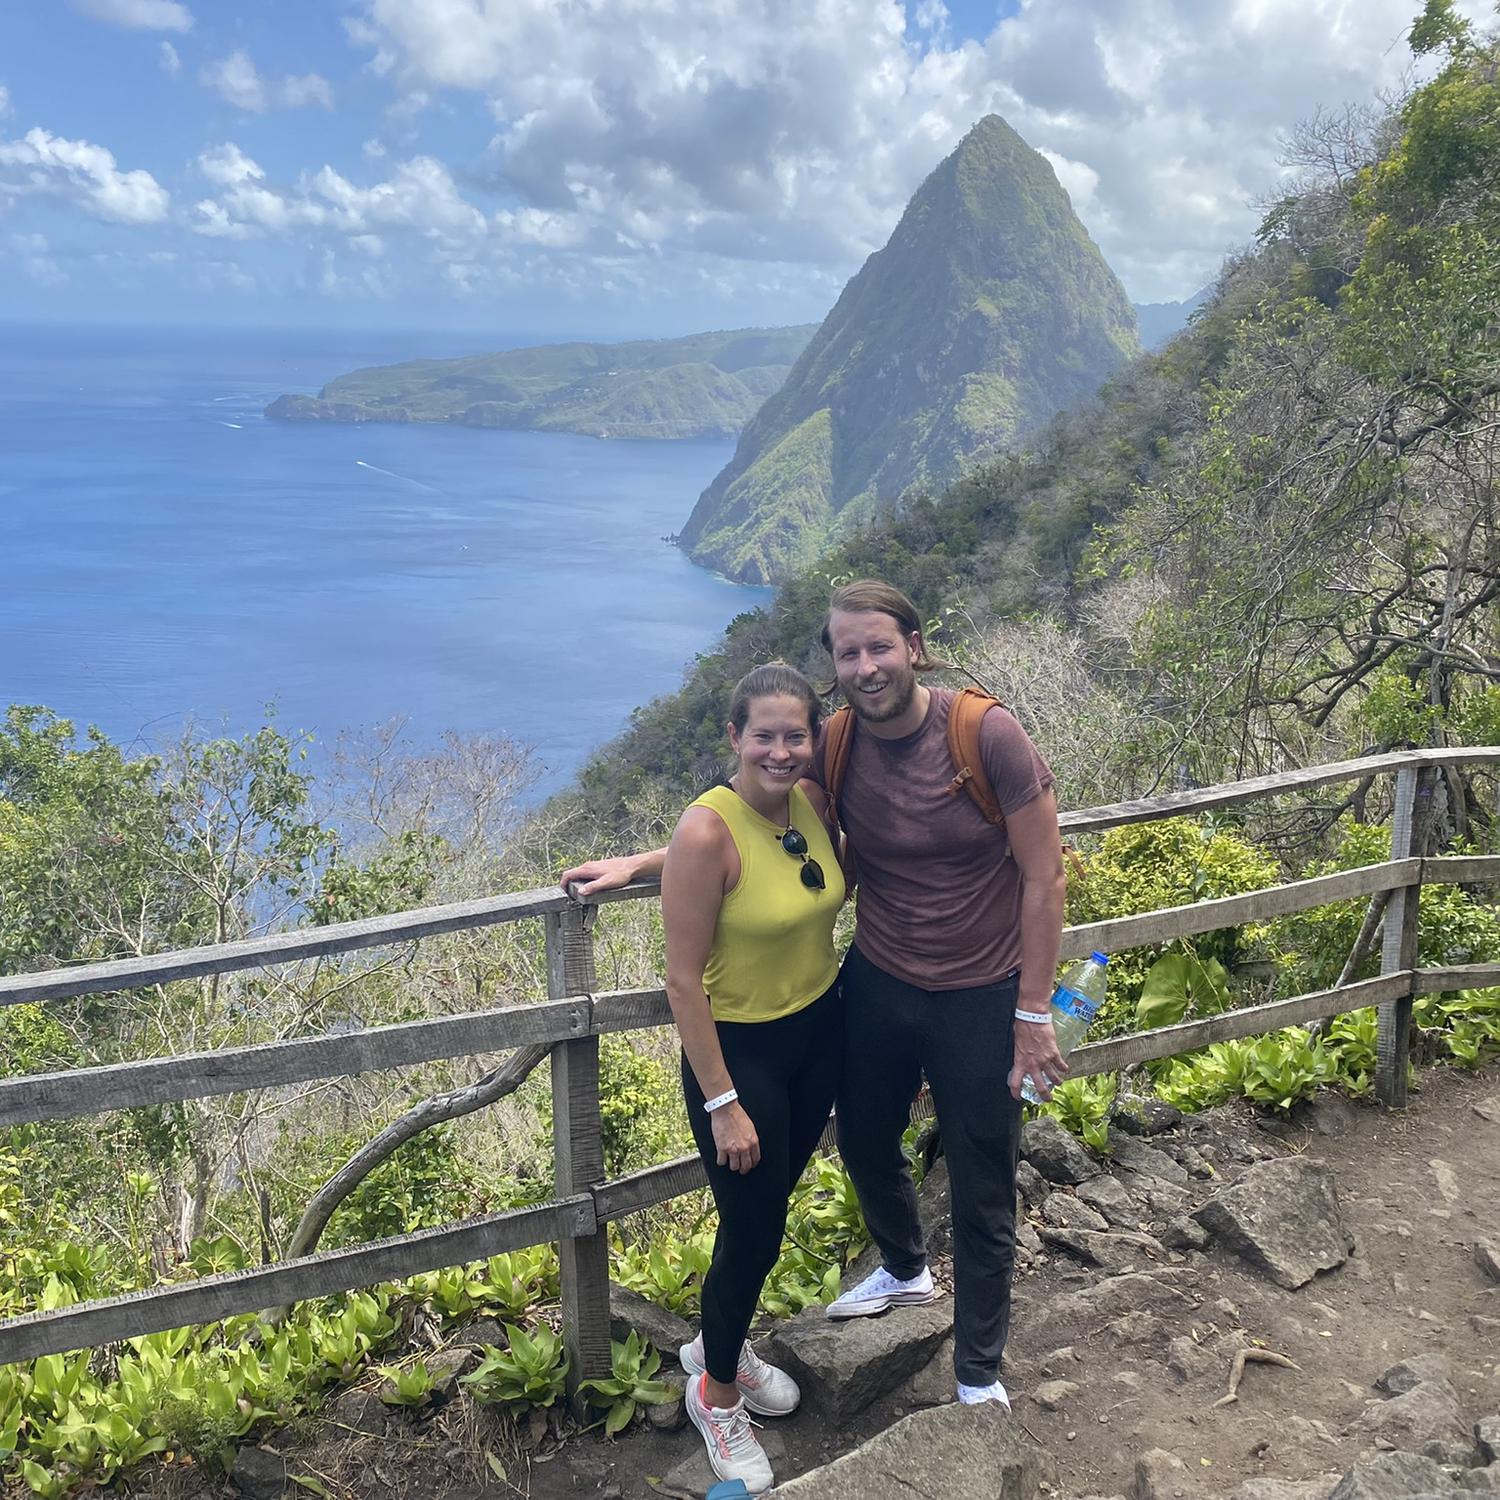 Hiking the Pitons! It was hot and very steep!